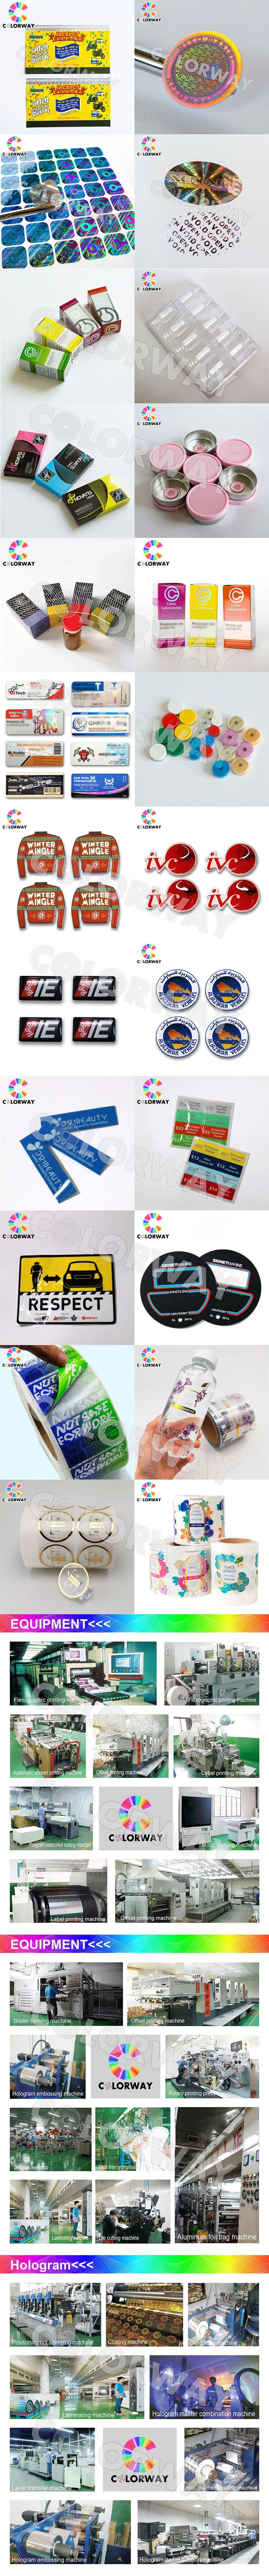 Colorful Printing Removable Paper Test Tube Label